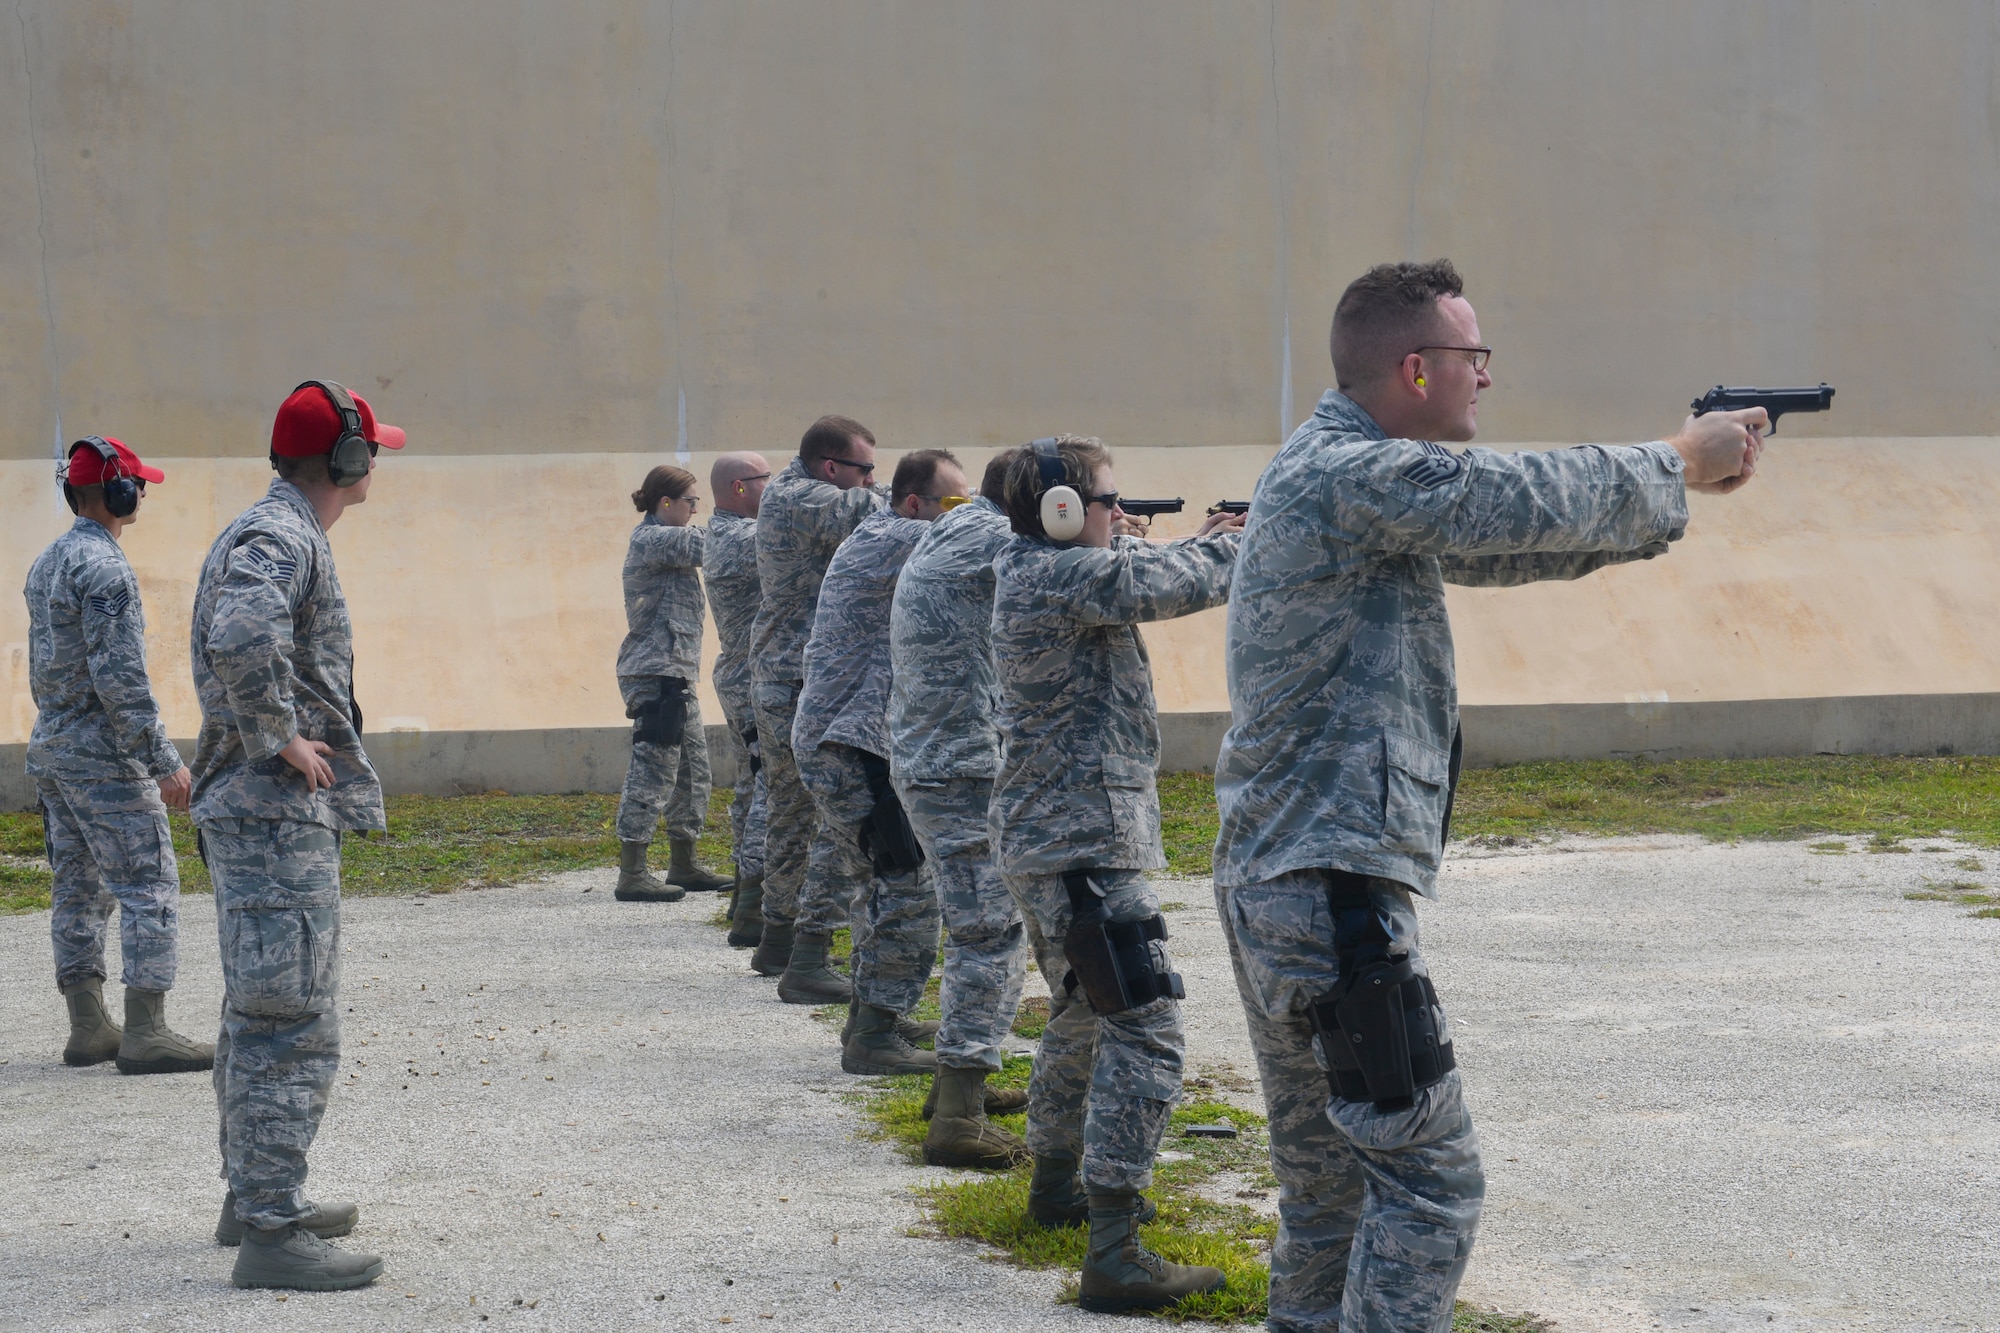 36th Sercurity Forces Squadron Combat Arms Training and Maintenance instructors supervise an M9 pistol qualification course at Andersen Air Force Base, Guam, Sept. 1, 2015. The CATM mission is to ensure all weapons utilized by 36th Wing members are functional, maintained and ready when the Airmen are called to duty. (U.S. Air Force photo by Staff Sgt. Robert Hicks/Released)